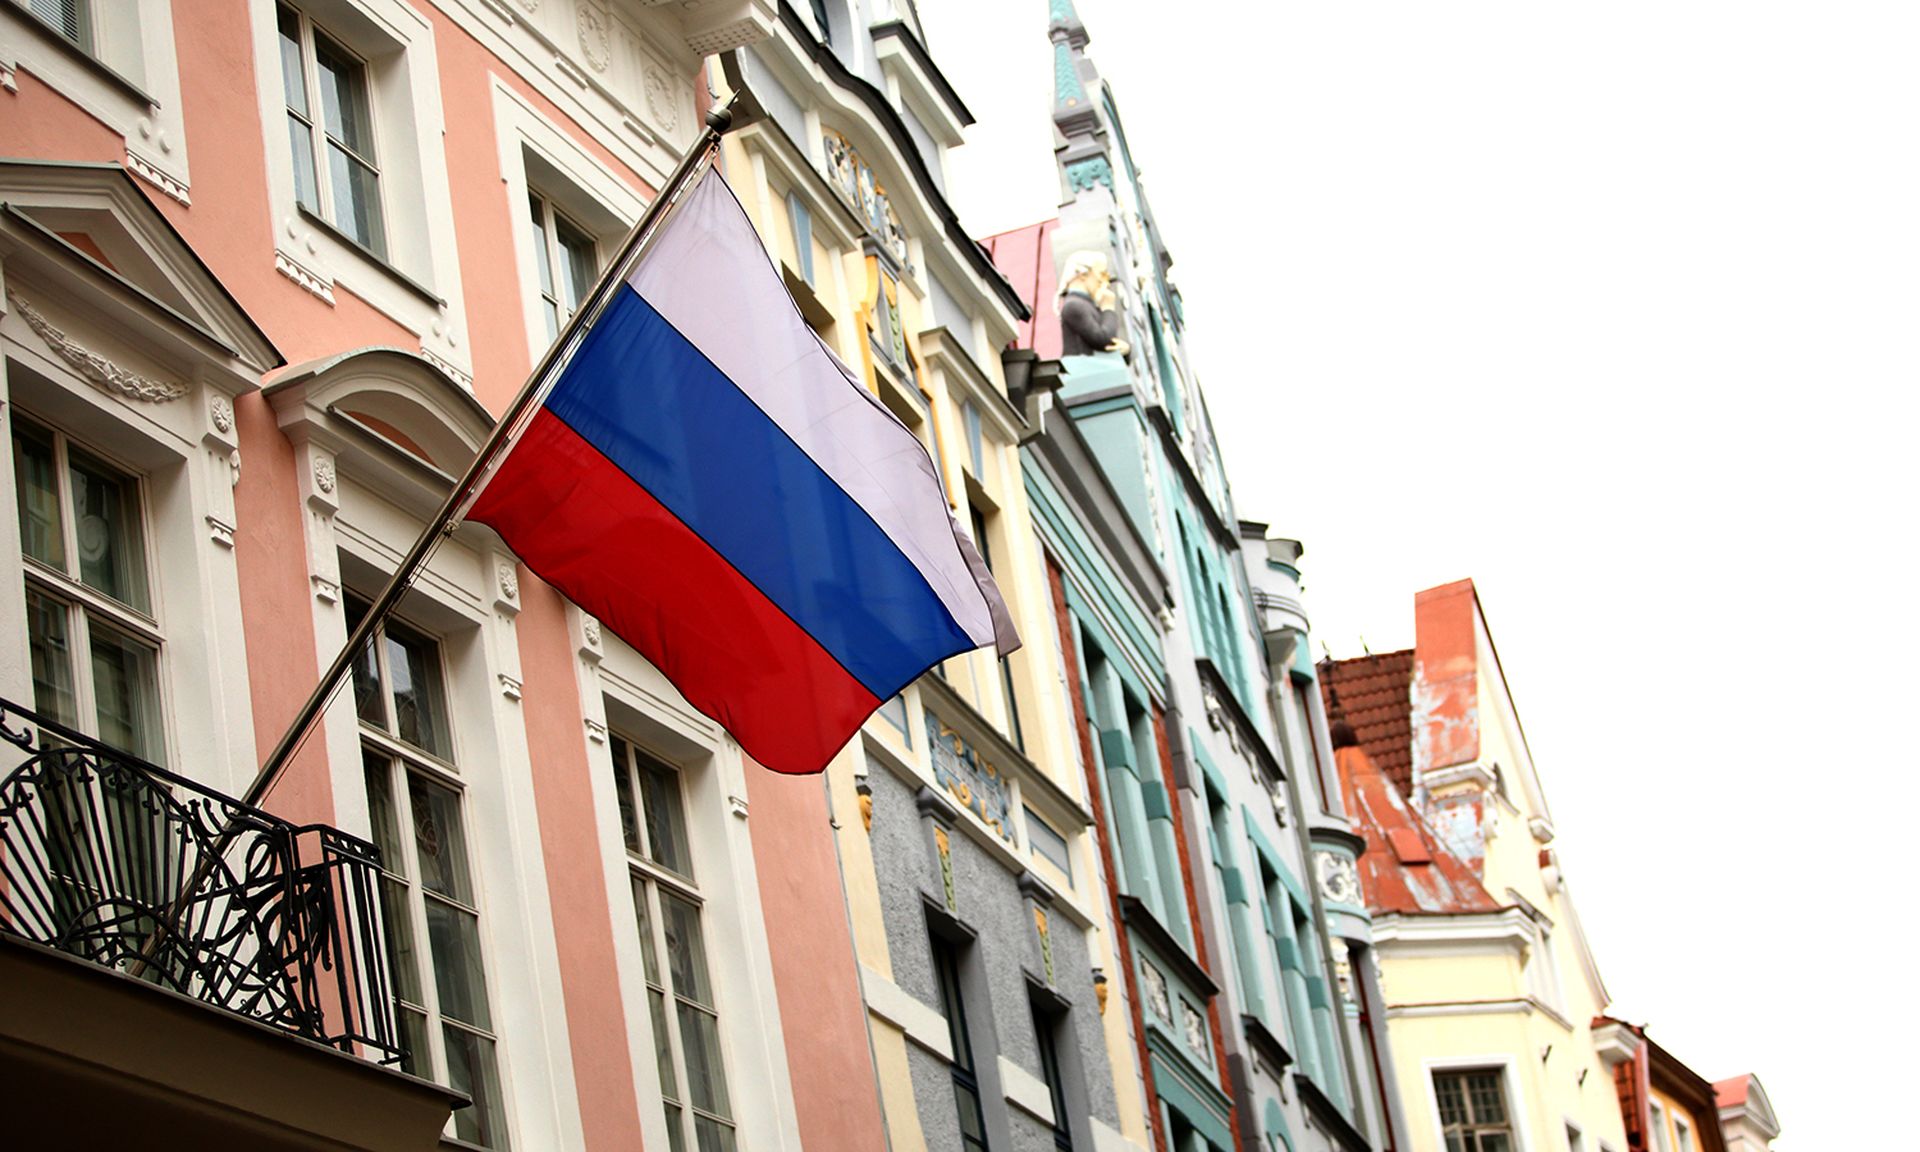 About 74% of revenues raised through ransomware go to Russian-affiliated actors, according to a Chainalysis report. Pictured: The Russian flag hangs outside the Russian Consulate on March 2, 2015, in Tallinn, Estonia. (Photo by Jordan Mansfield/Getty Images)